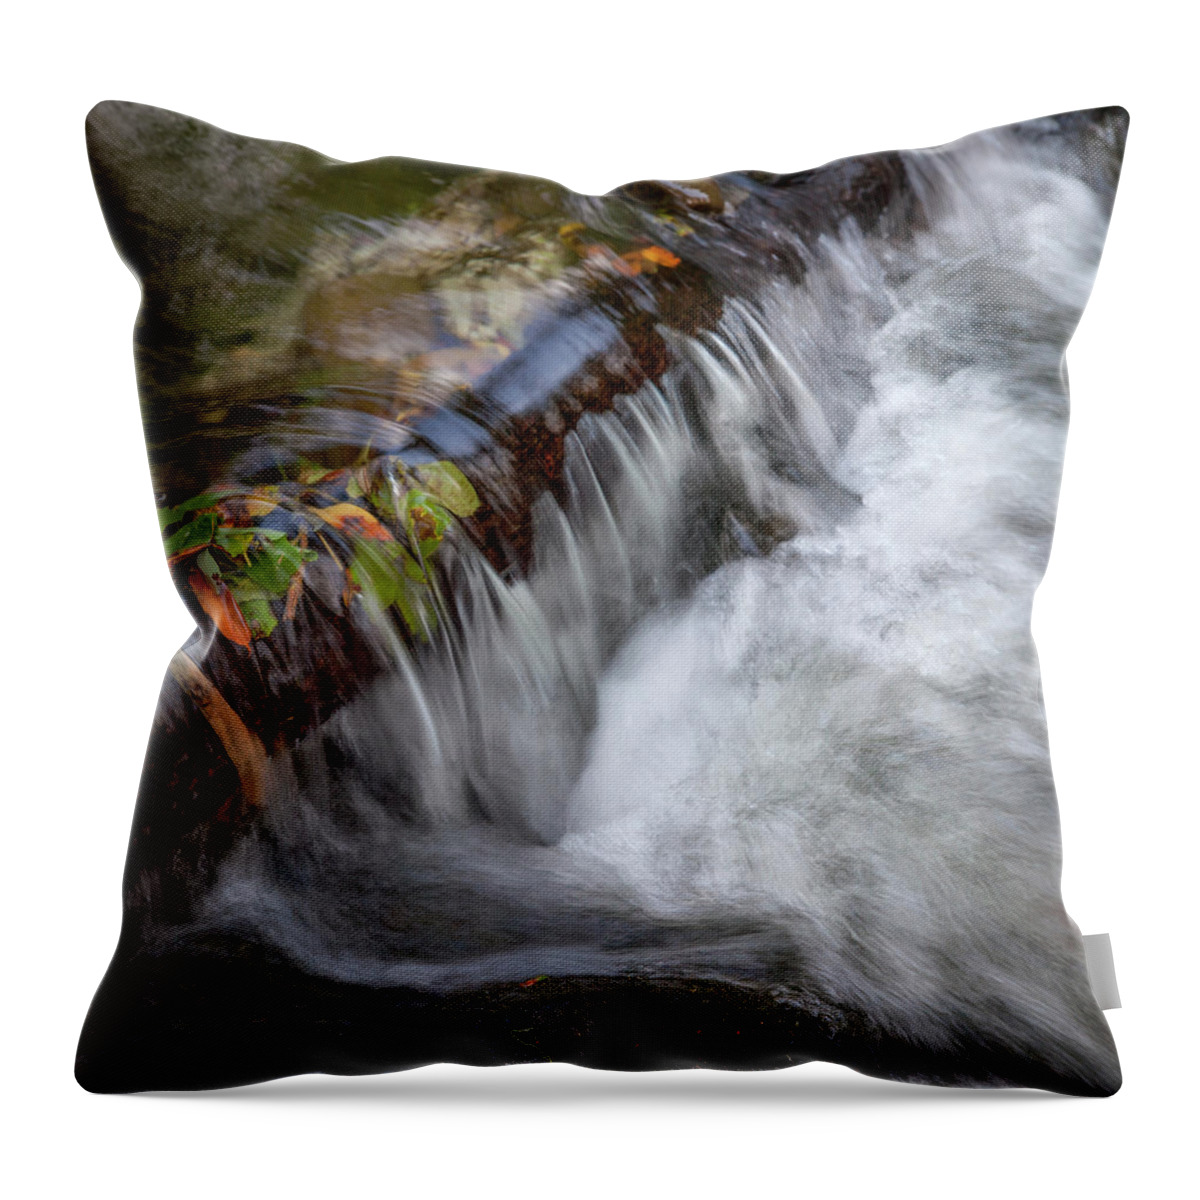 Olema Creek Throw Pillow featuring the photograph Olema Creek, West Marin by Donald Kinney